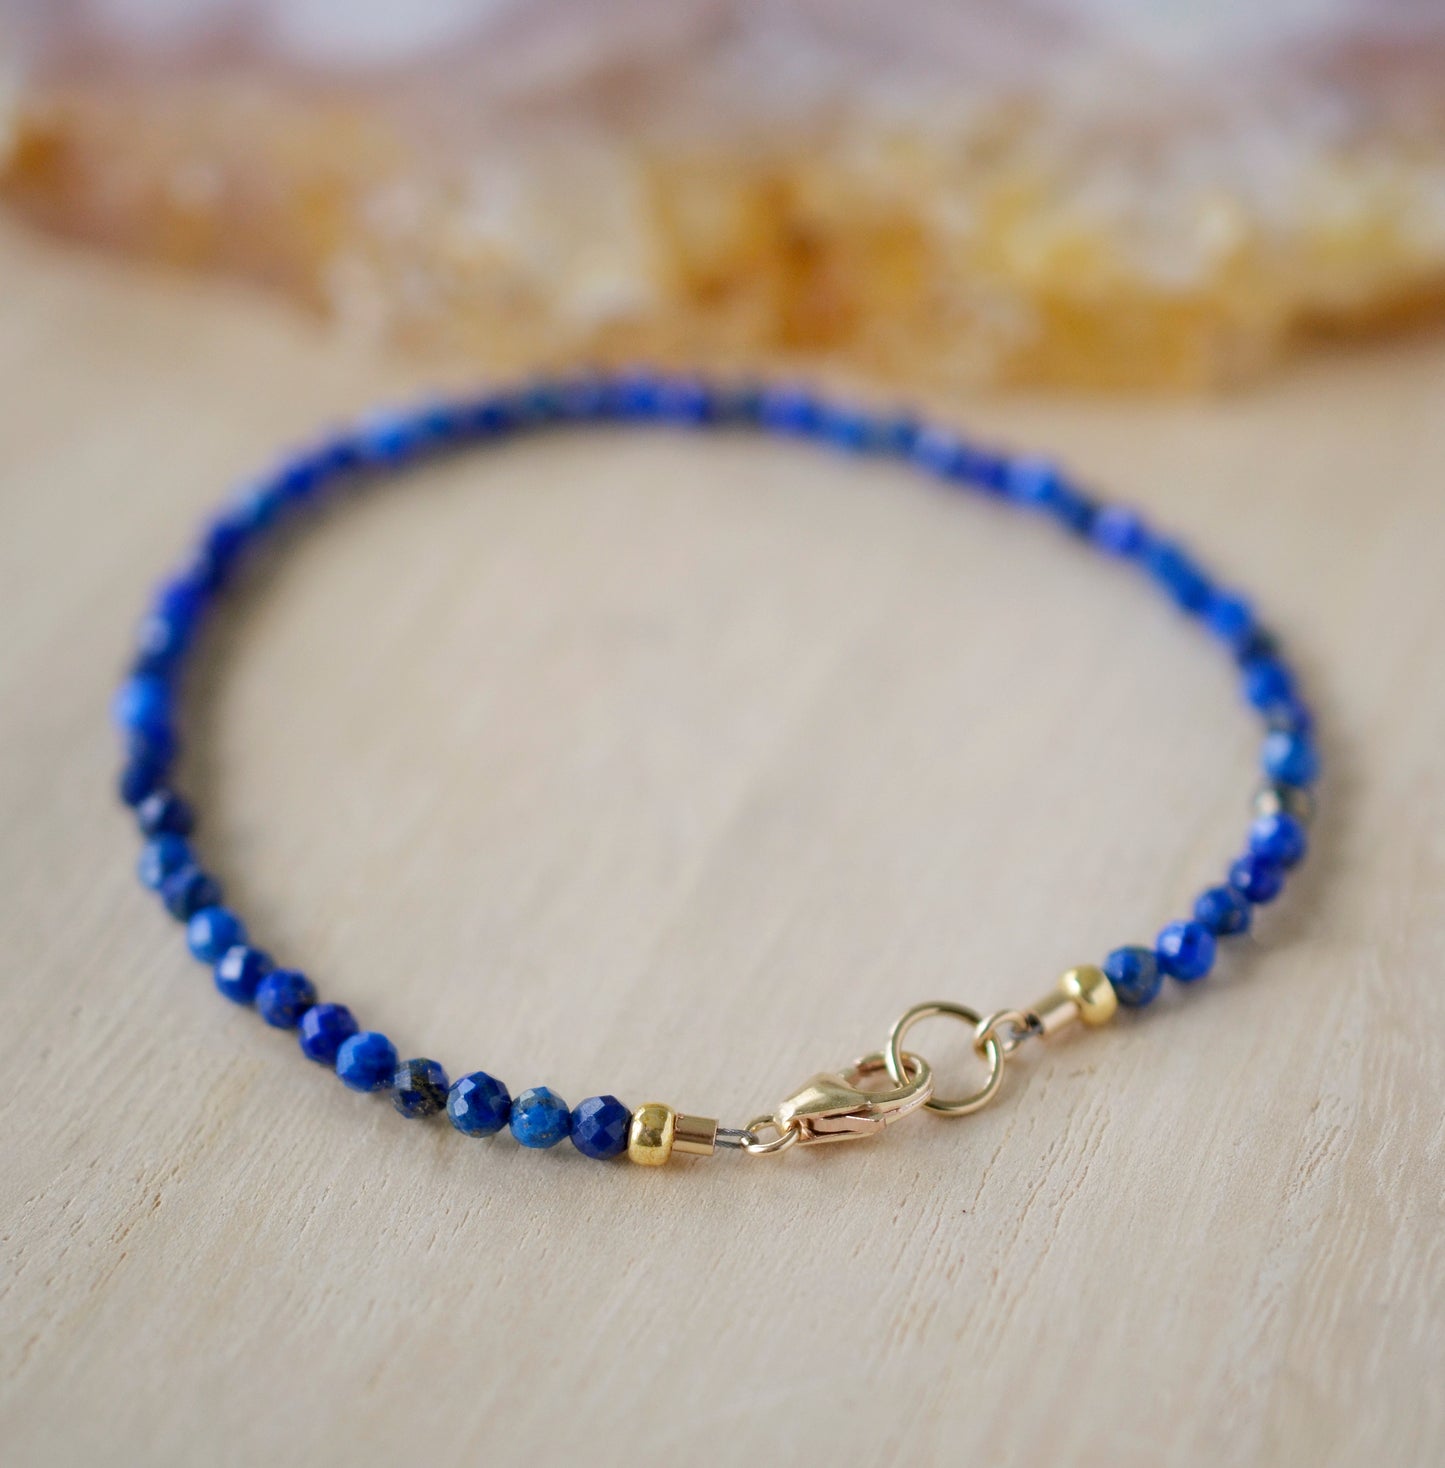 Minimalist Lapis Lazuli bracelet. Handmade with small 3mm natural lapis beads and set onto a sterling silver or 14k gold filled clasp.